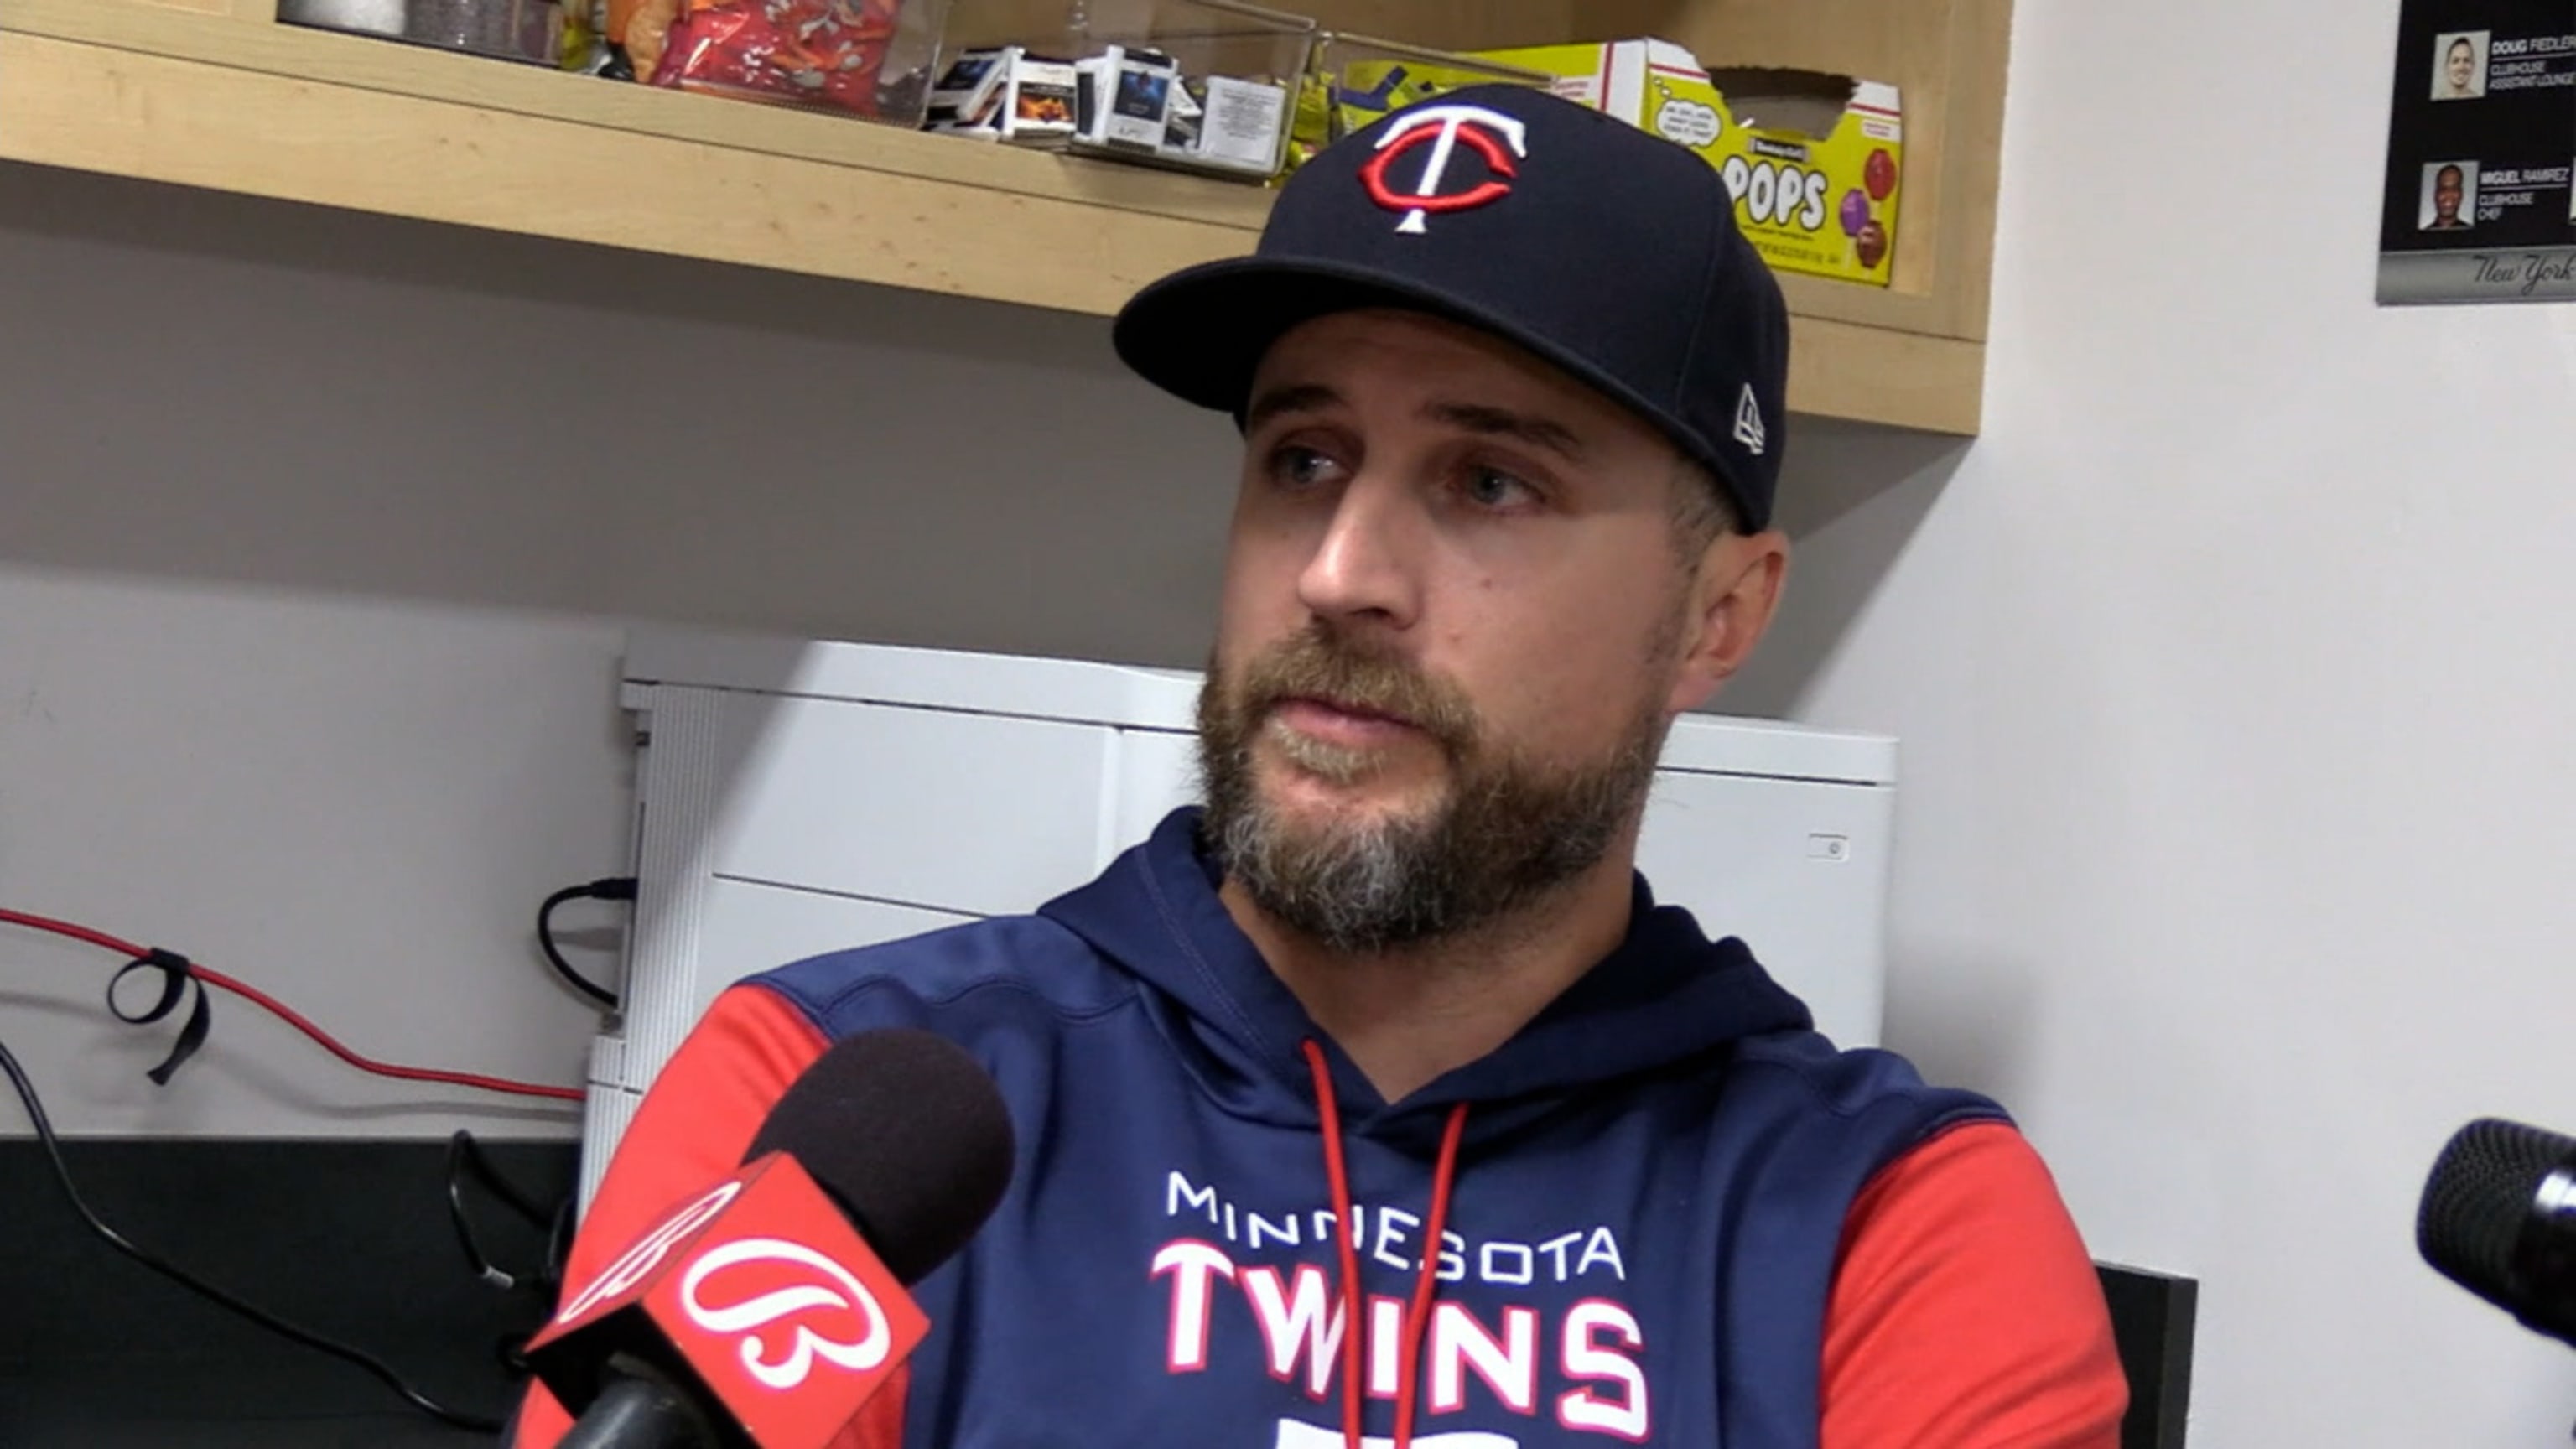 Louie Varland: Twins 2022 Minor League Player Of The Year — College  Baseball, MLB Draft, Prospects - Baseball America